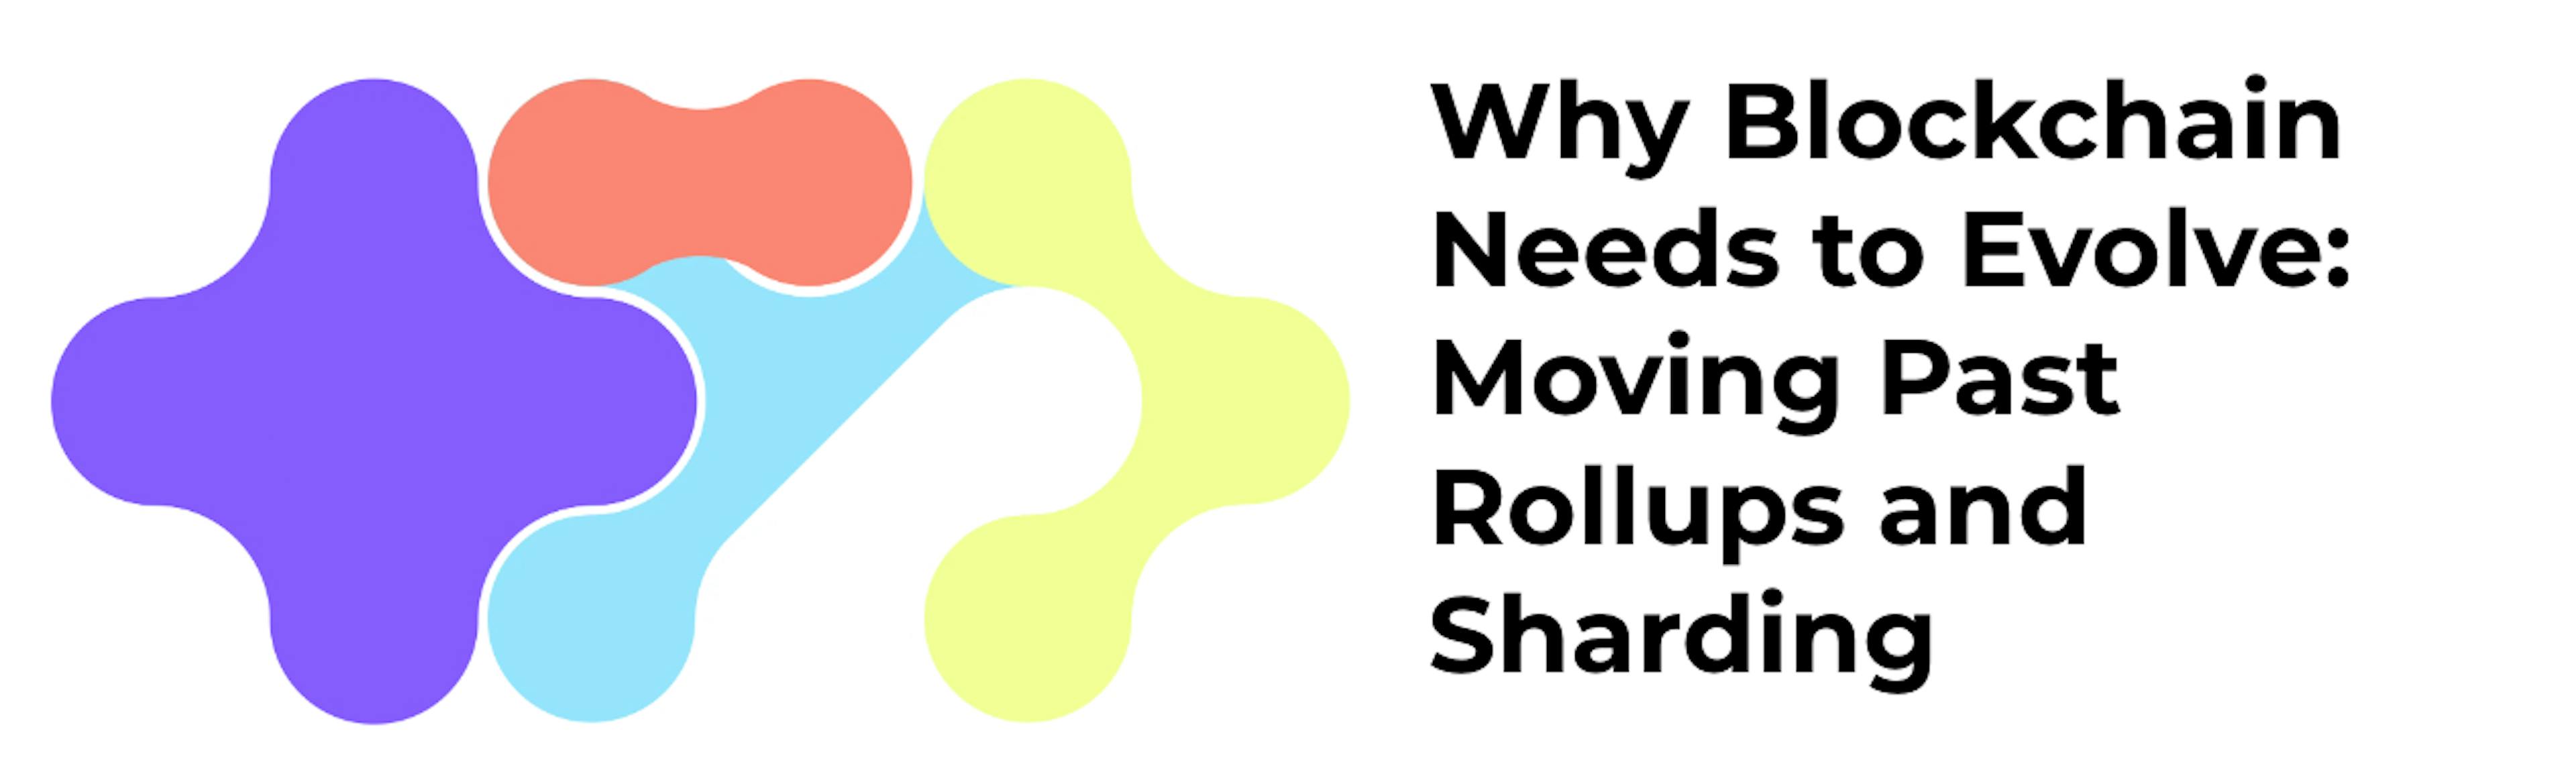 featured image - Beyond Sharding and Rollups: A New Approach to Blockchain Scalability